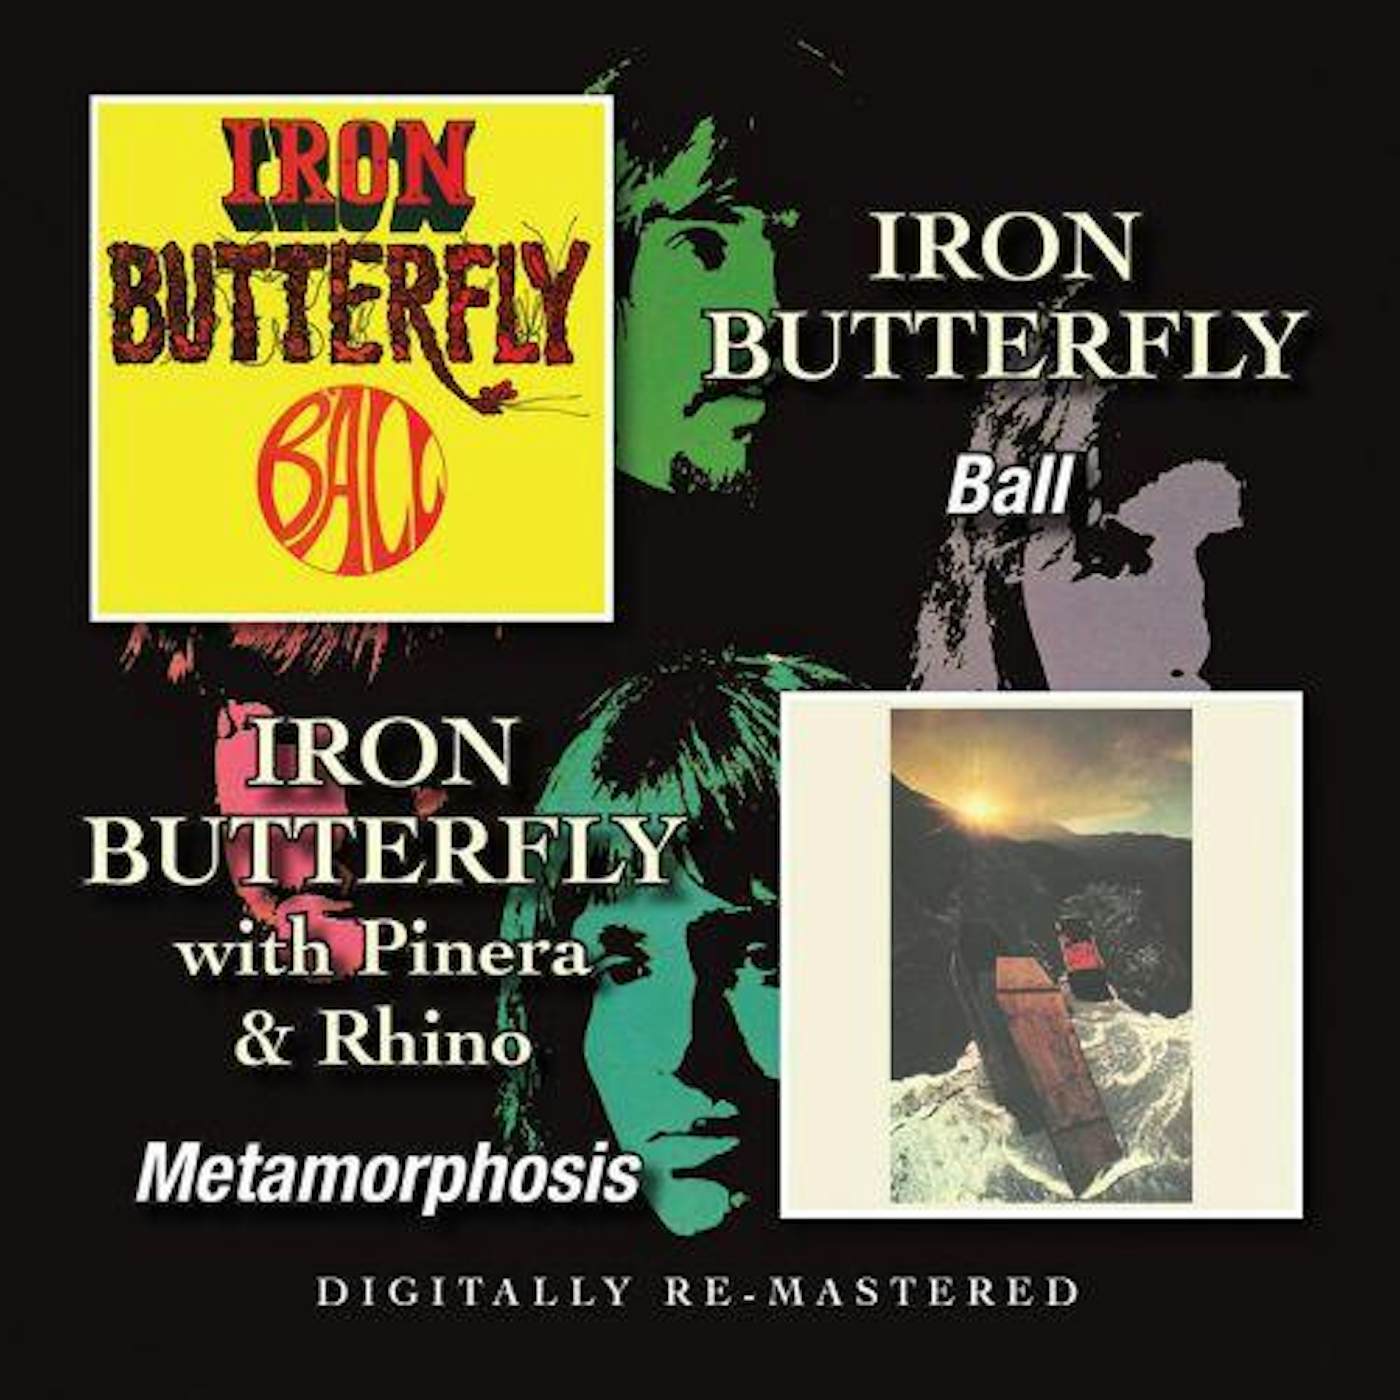 Iron Butterfly BALL / METAMORPHOSIS (REMASTERED) CD